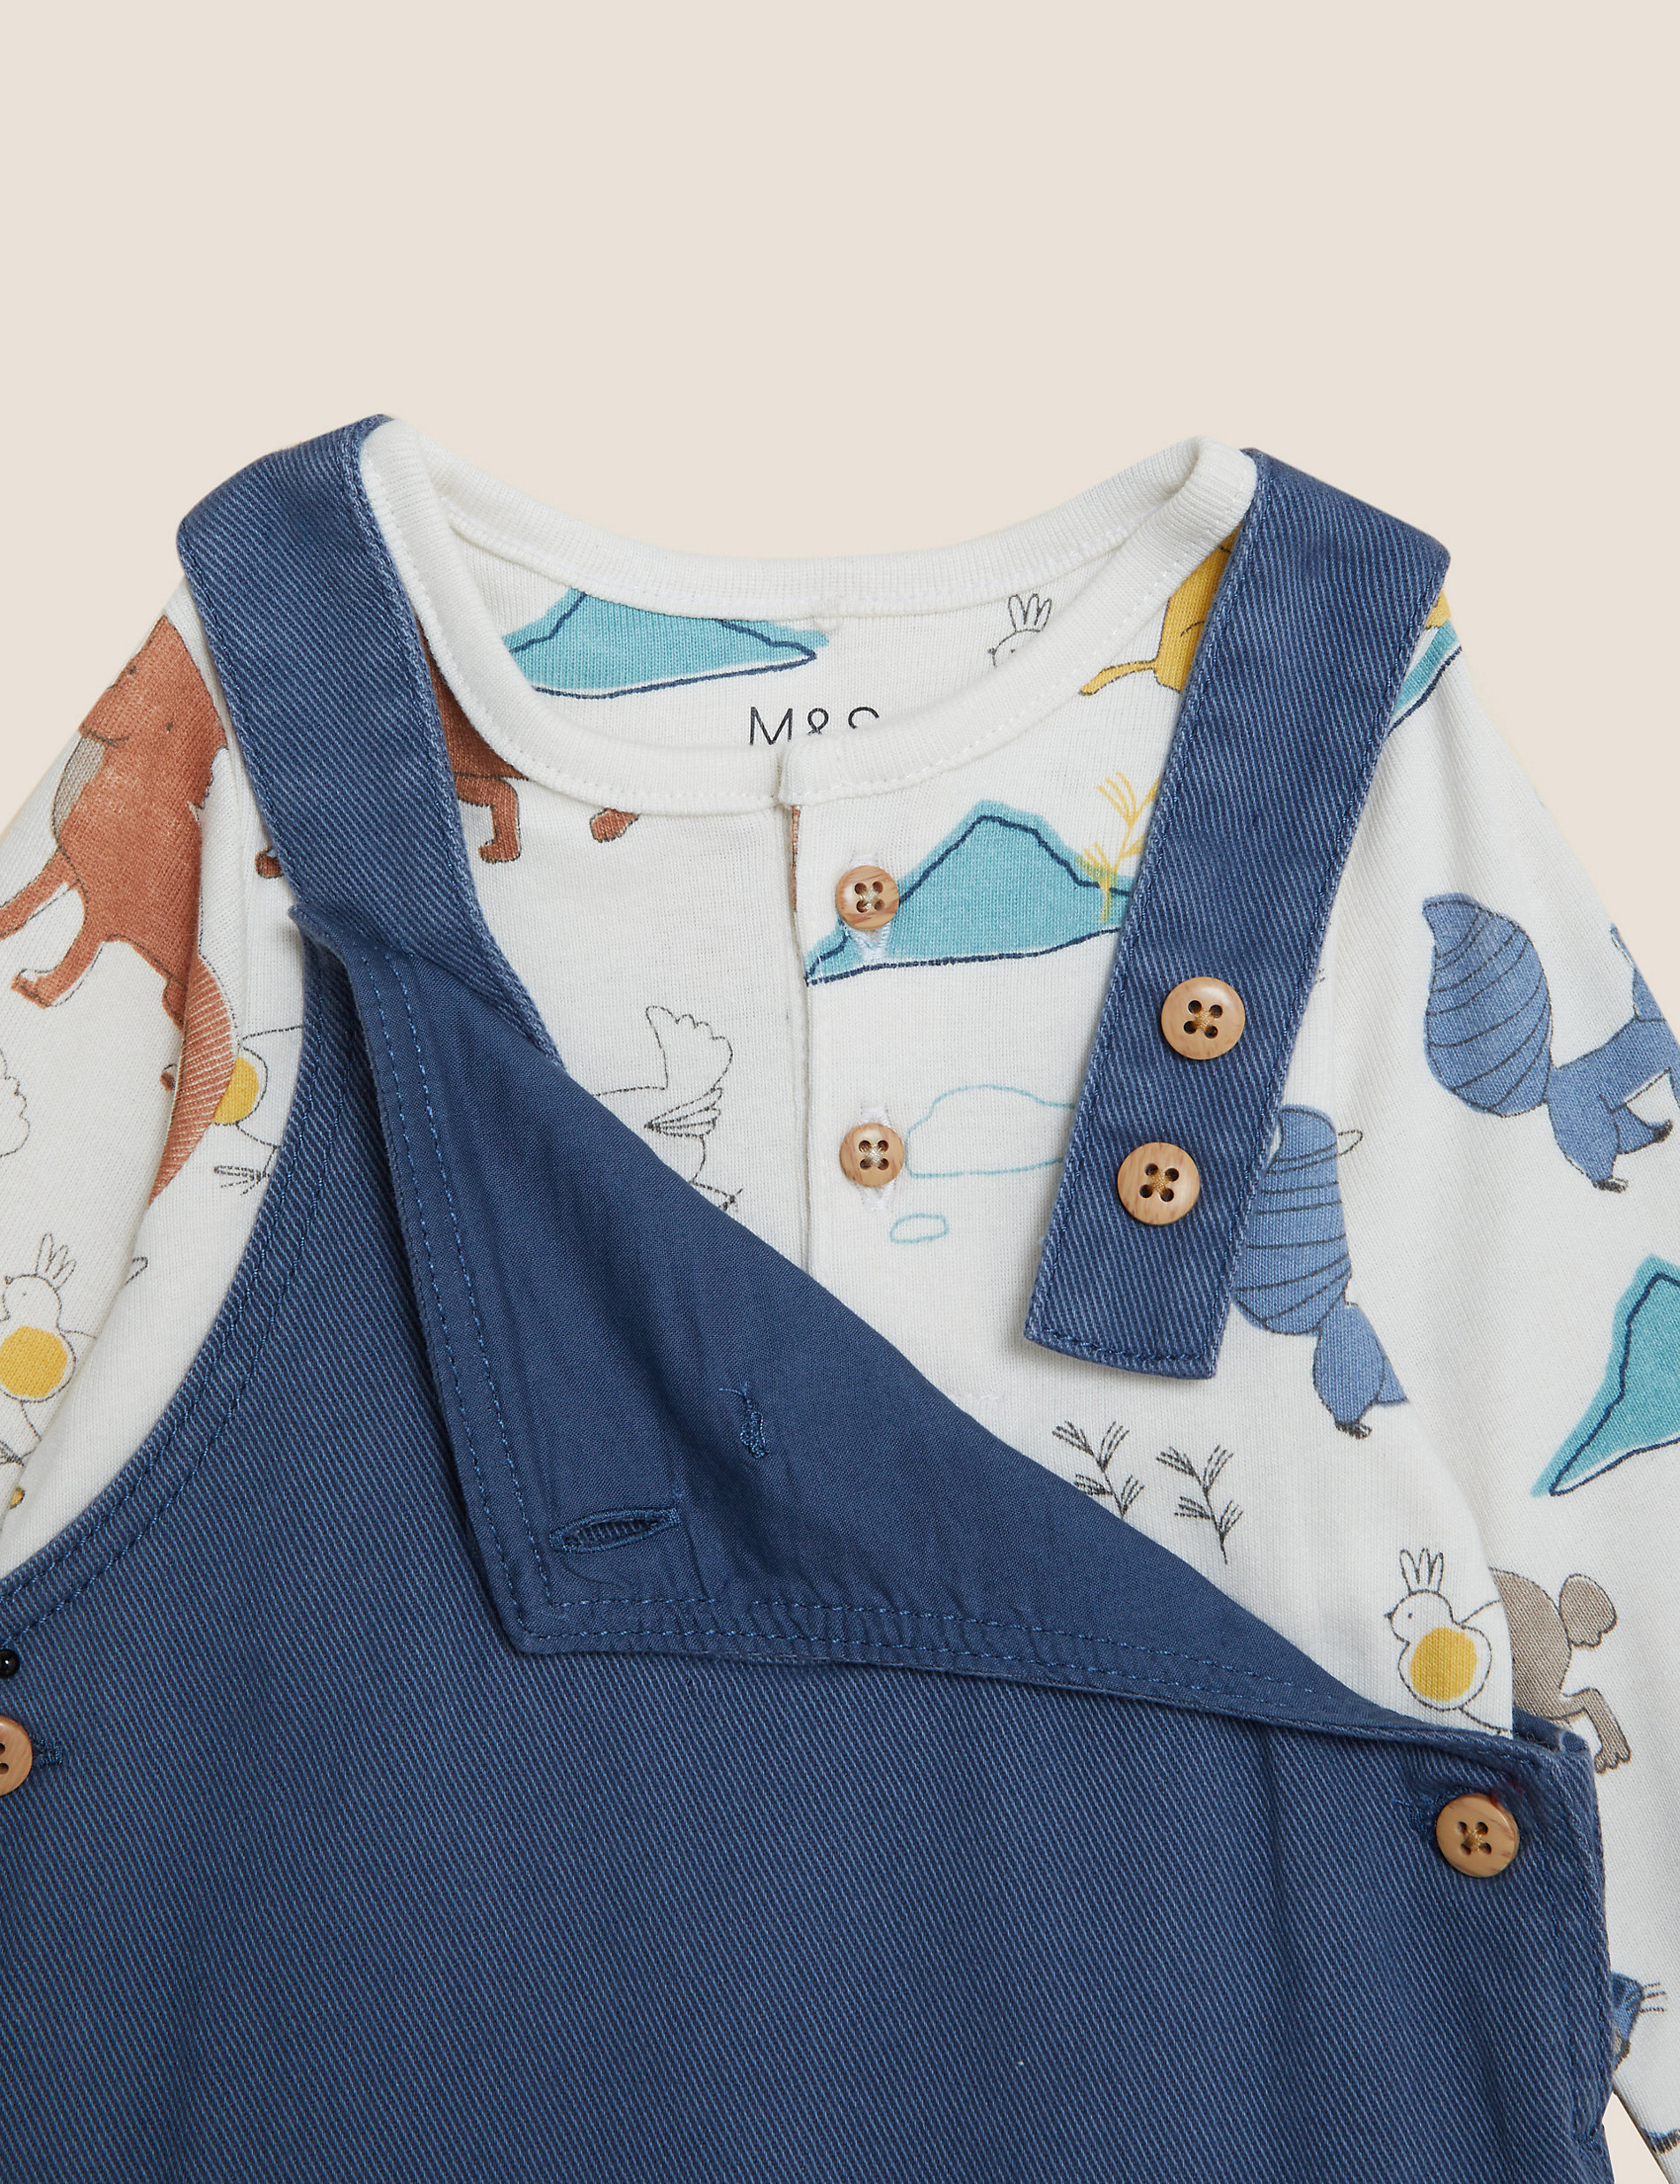 2pc Pure Cotton Dungaree Outfit (0-3 Yrs)